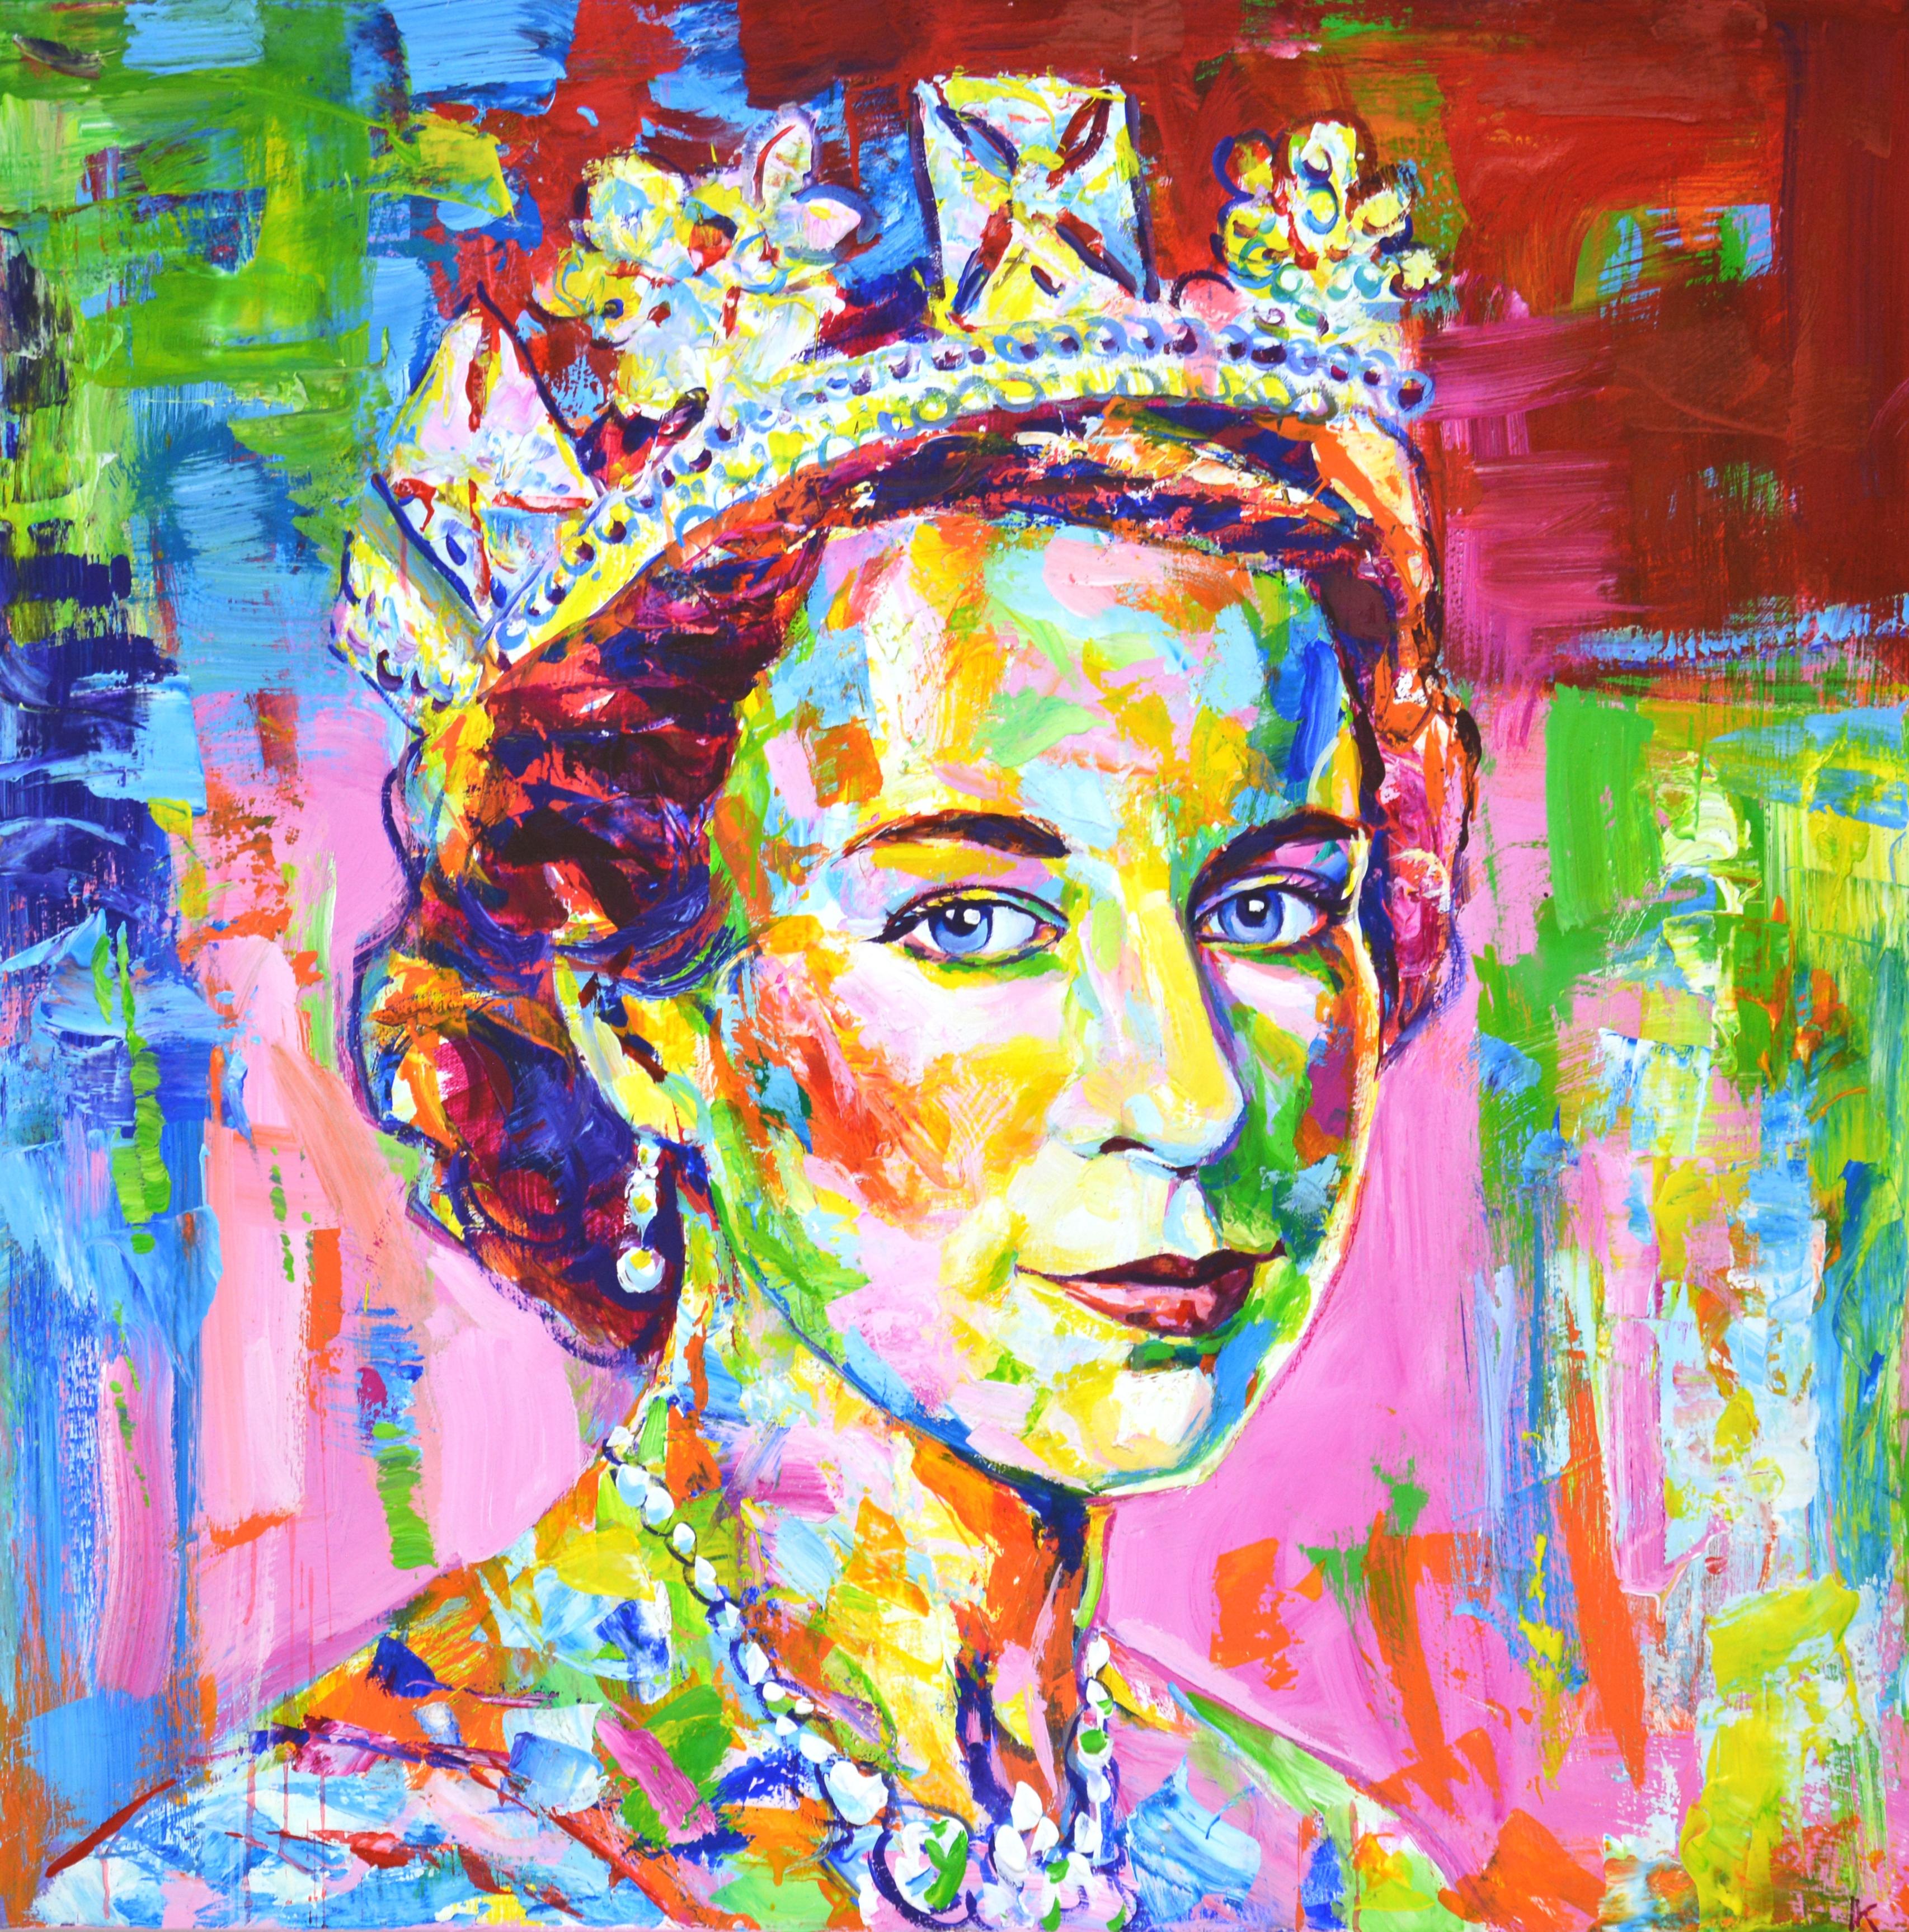 Print on canvas with the portrait of Queen Elisabeth II (ref.#0502) in Pop Art style, which was painted by the artist Iryna Kastsova.
The print size is 50x50cm plus 2cm from each side for stretching. Hand-signed on the backside.
Printed exclusively